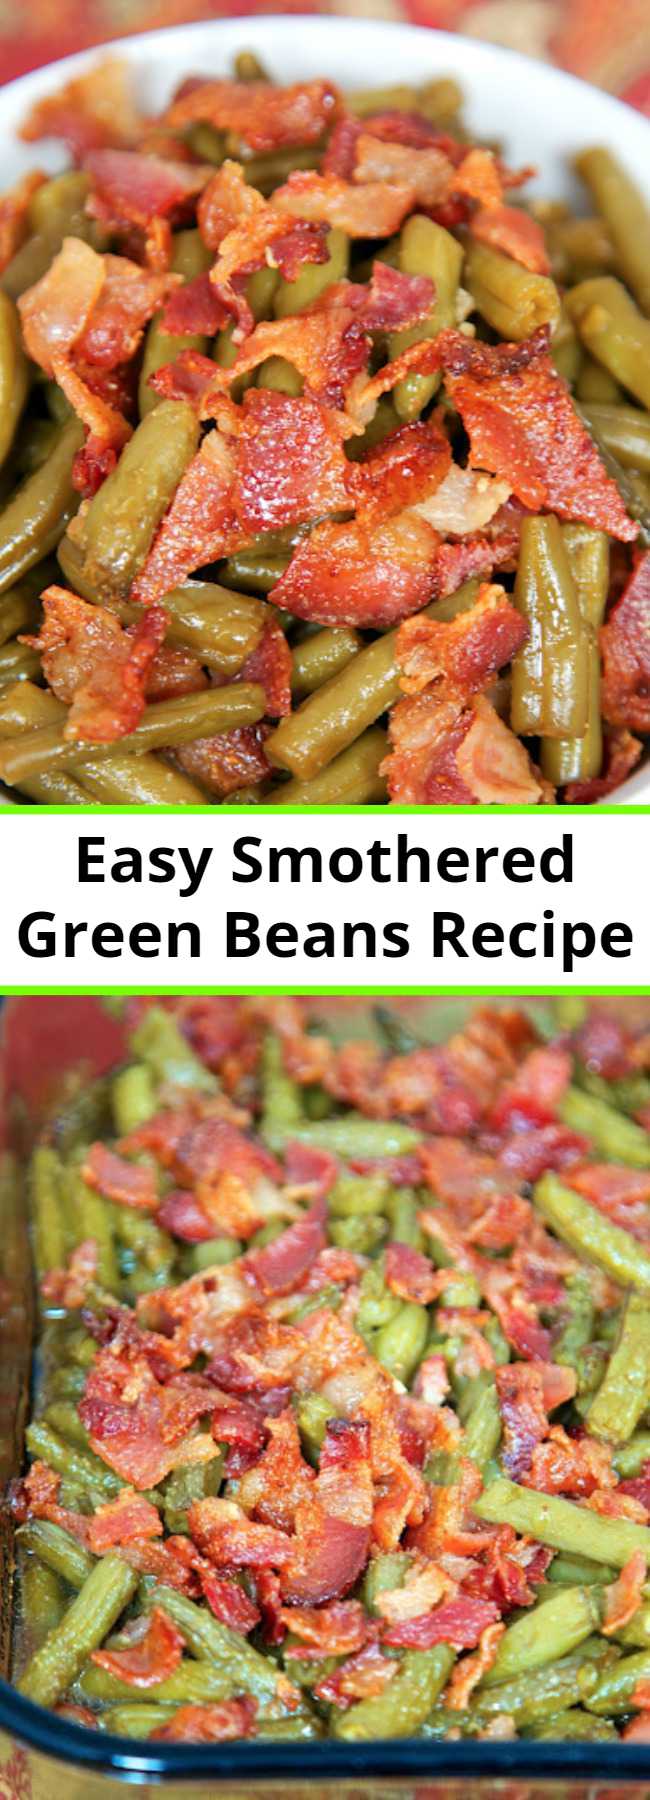 Easy Smothered Green Beans Recipe – Mom Secret Ingrediets